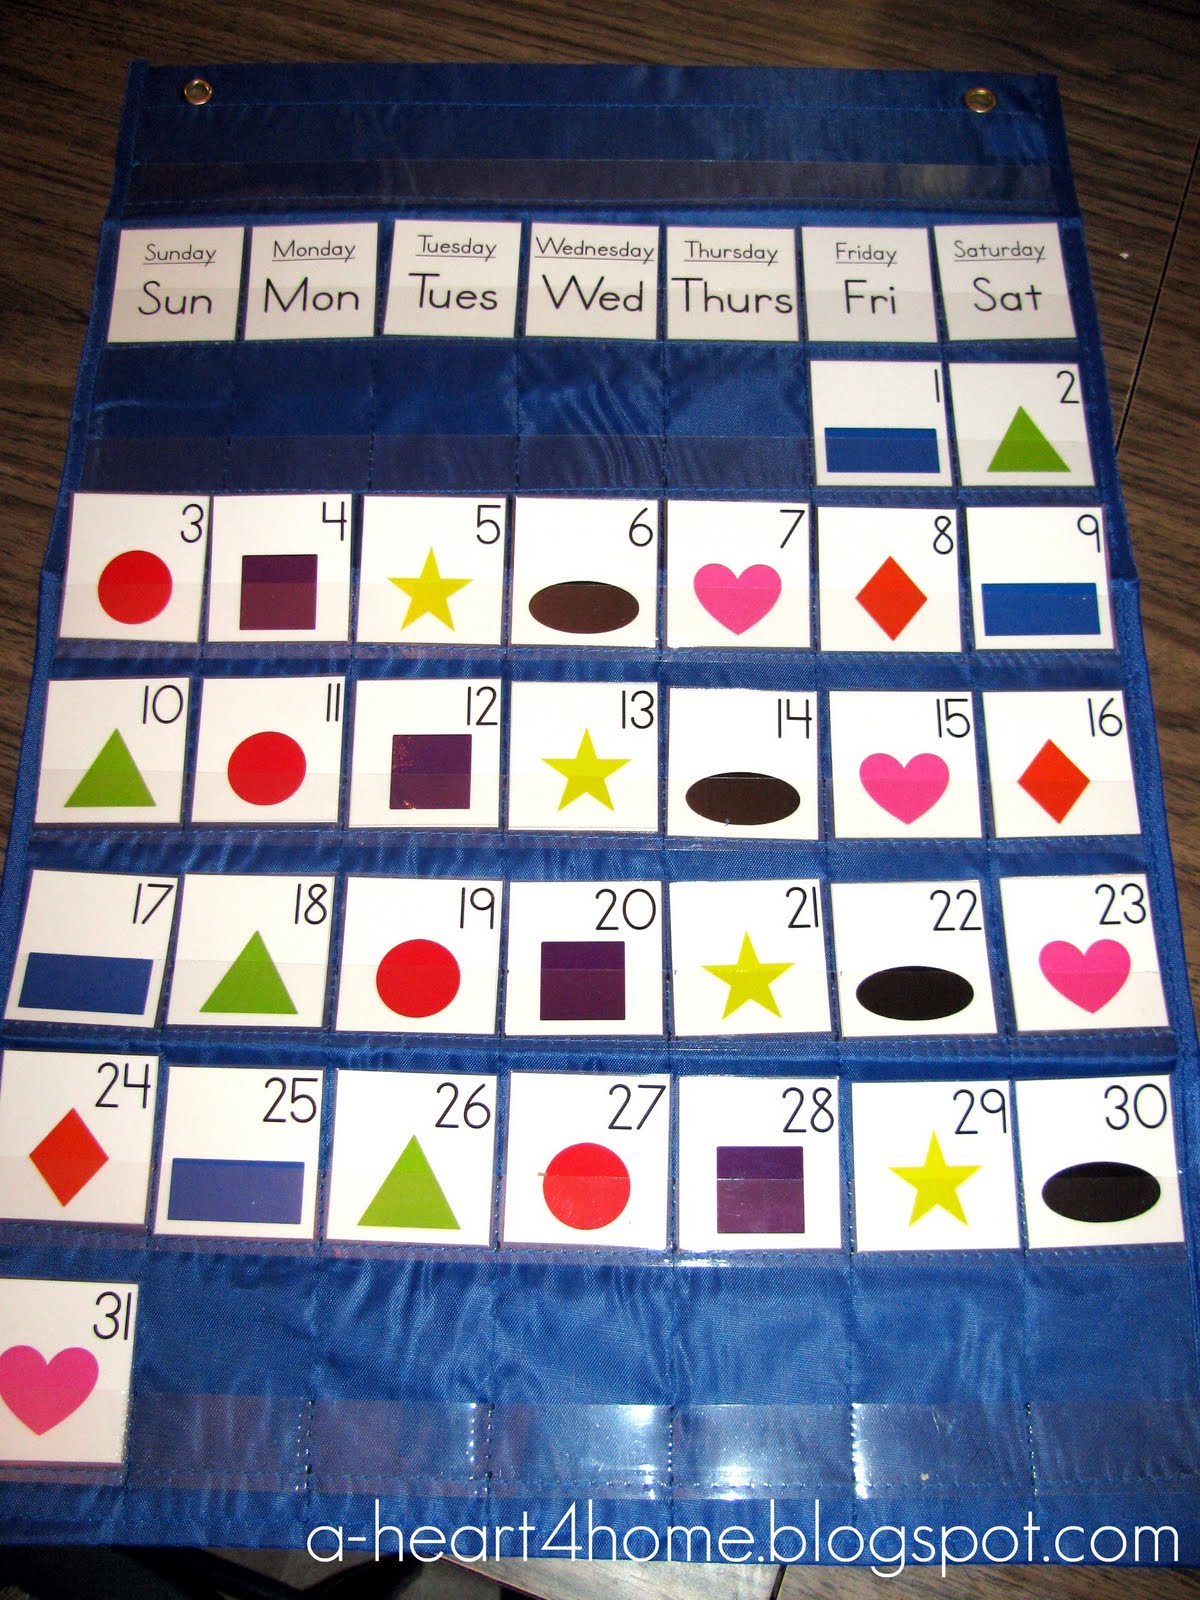 A Heart For Home: Sew Your Own Pocket Chart Calendar from a $1 Target